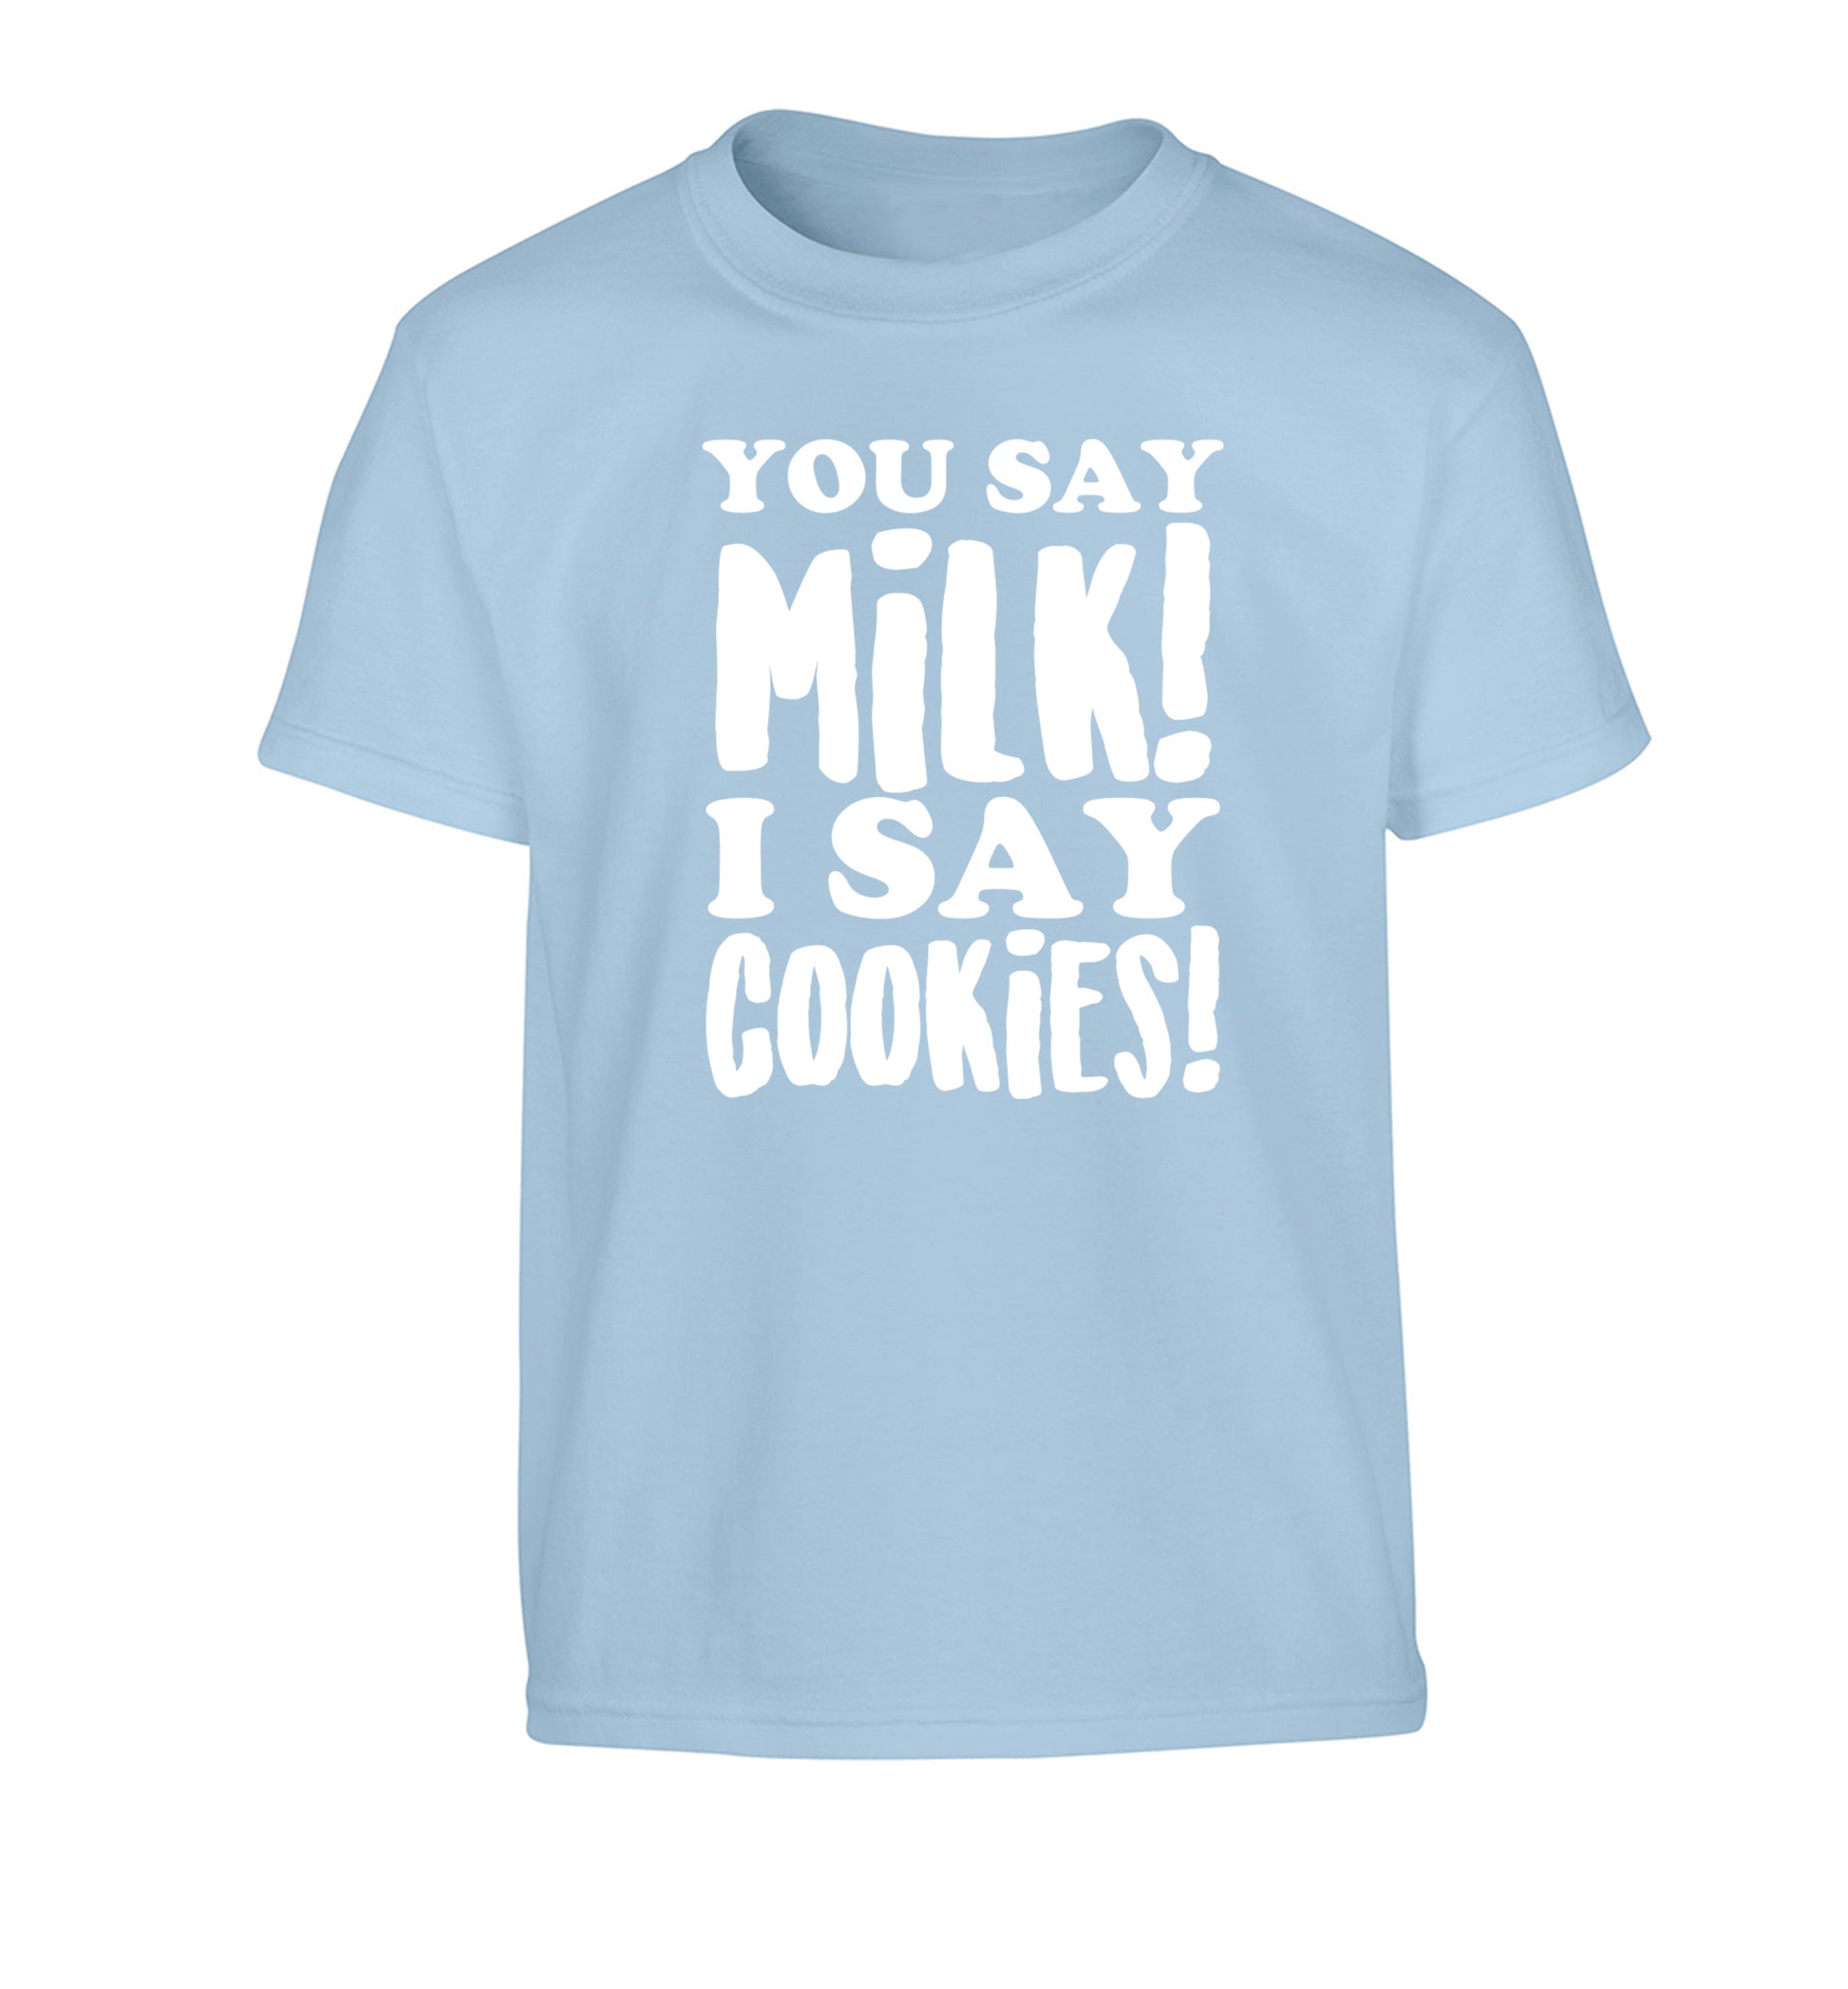 You say milk I say cookies! Children's light blue Tshirt 12-14 Years